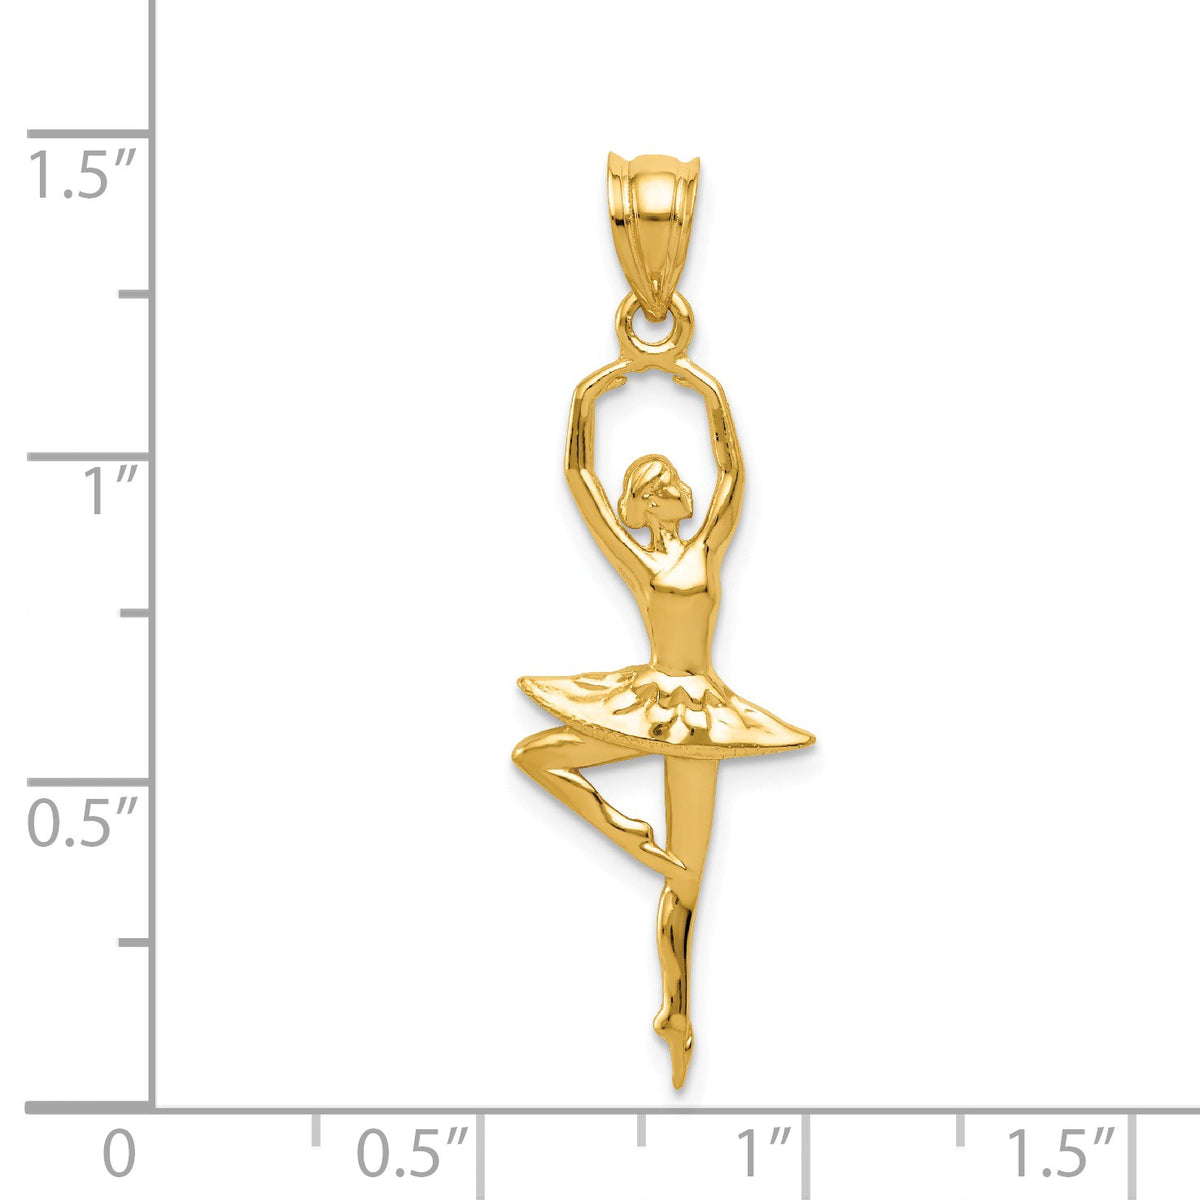 Alternate view of the 14k Yellow Gold Pointe Ballerina Pendant, 12 x 36mm by The Black Bow Jewelry Co.